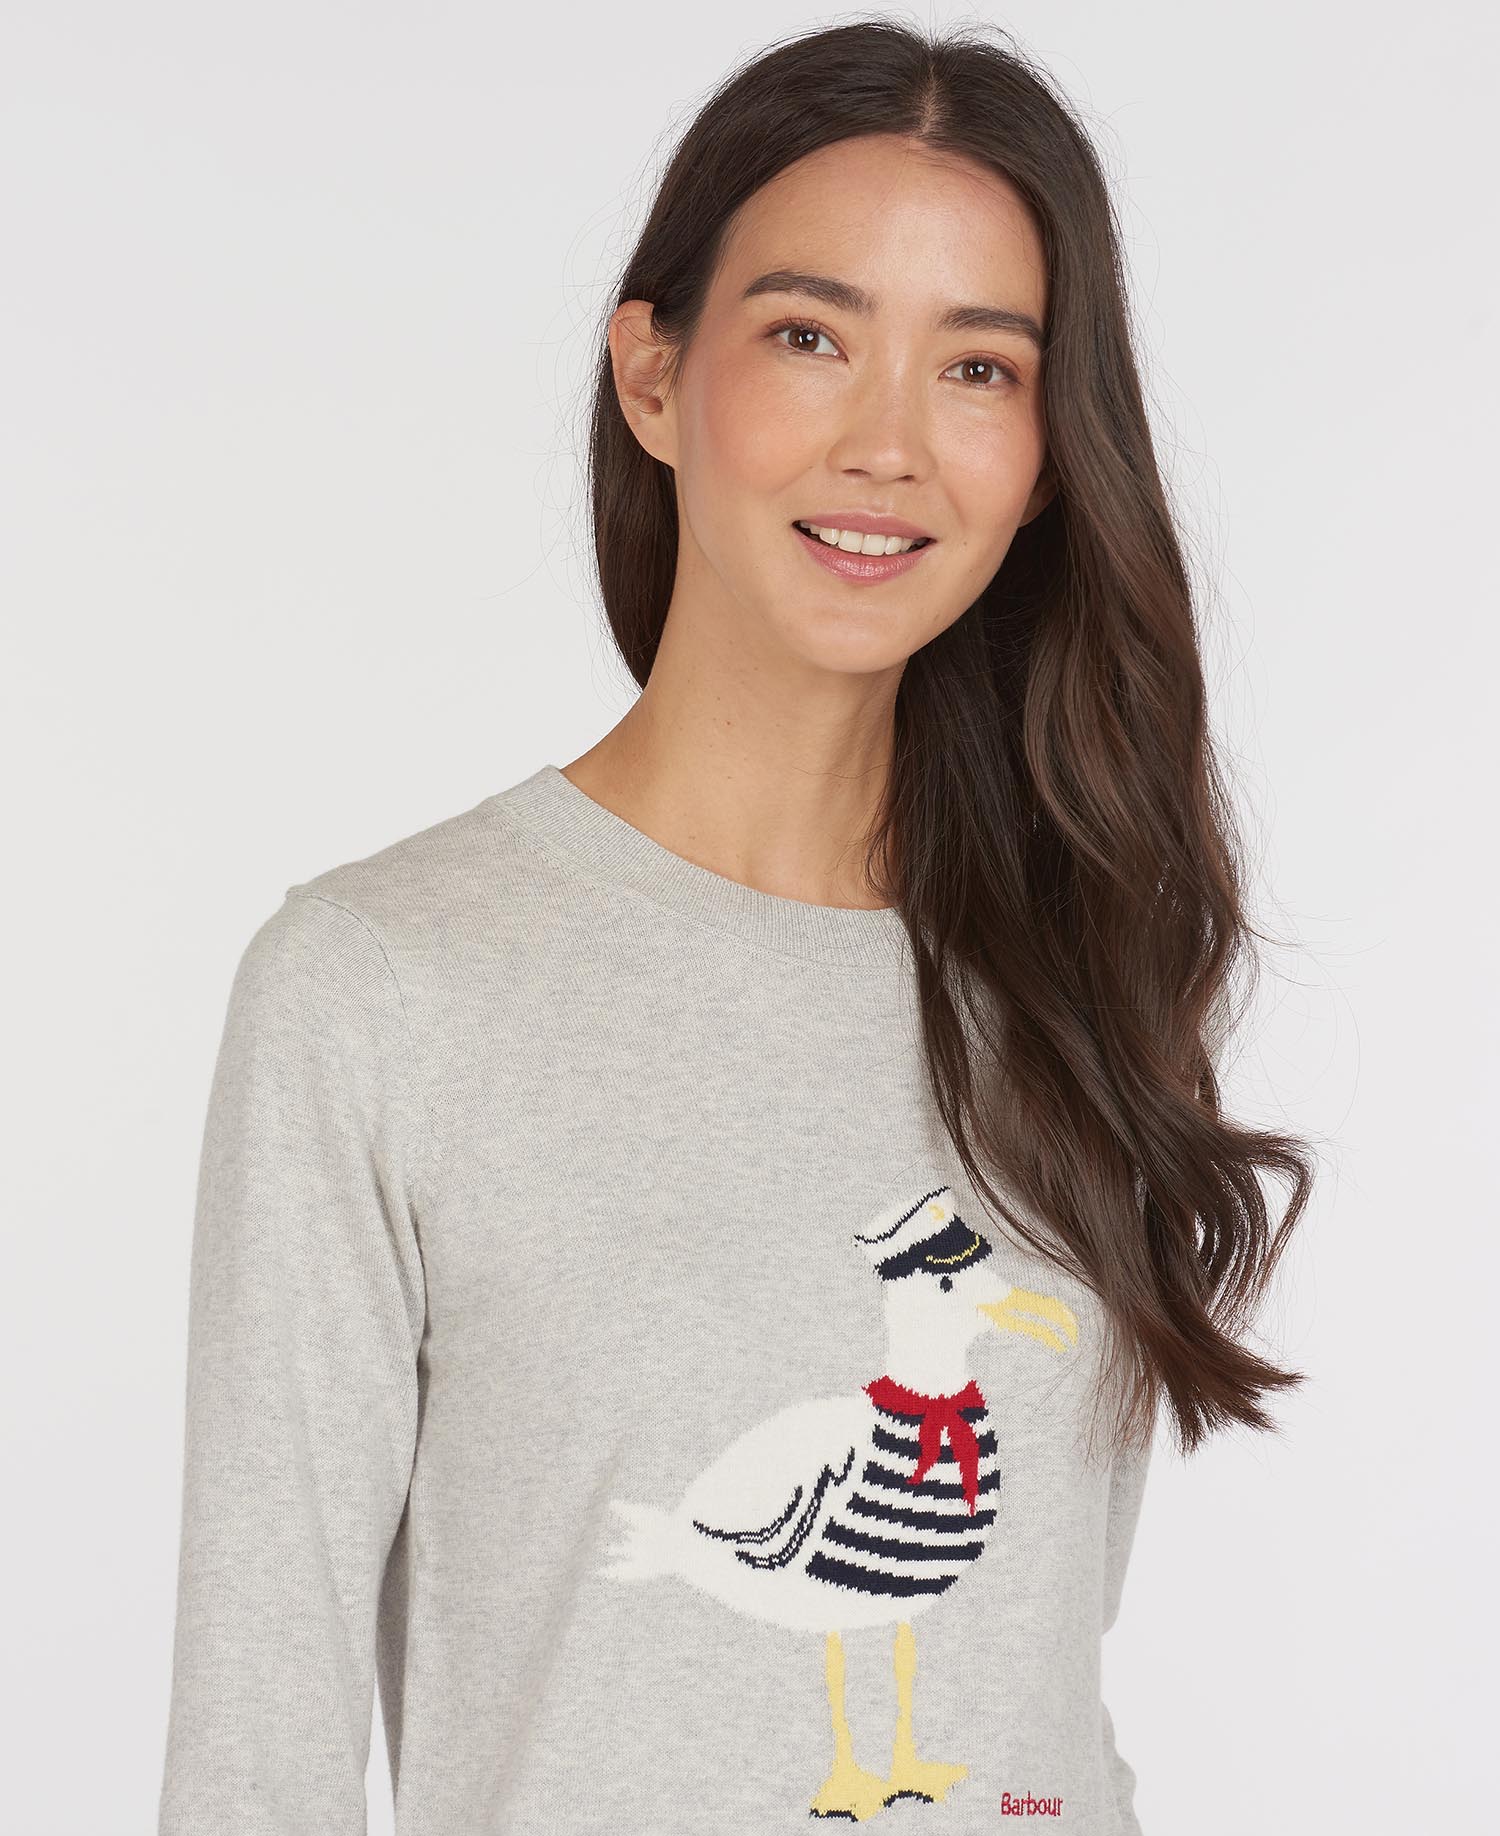 barbour seagull top